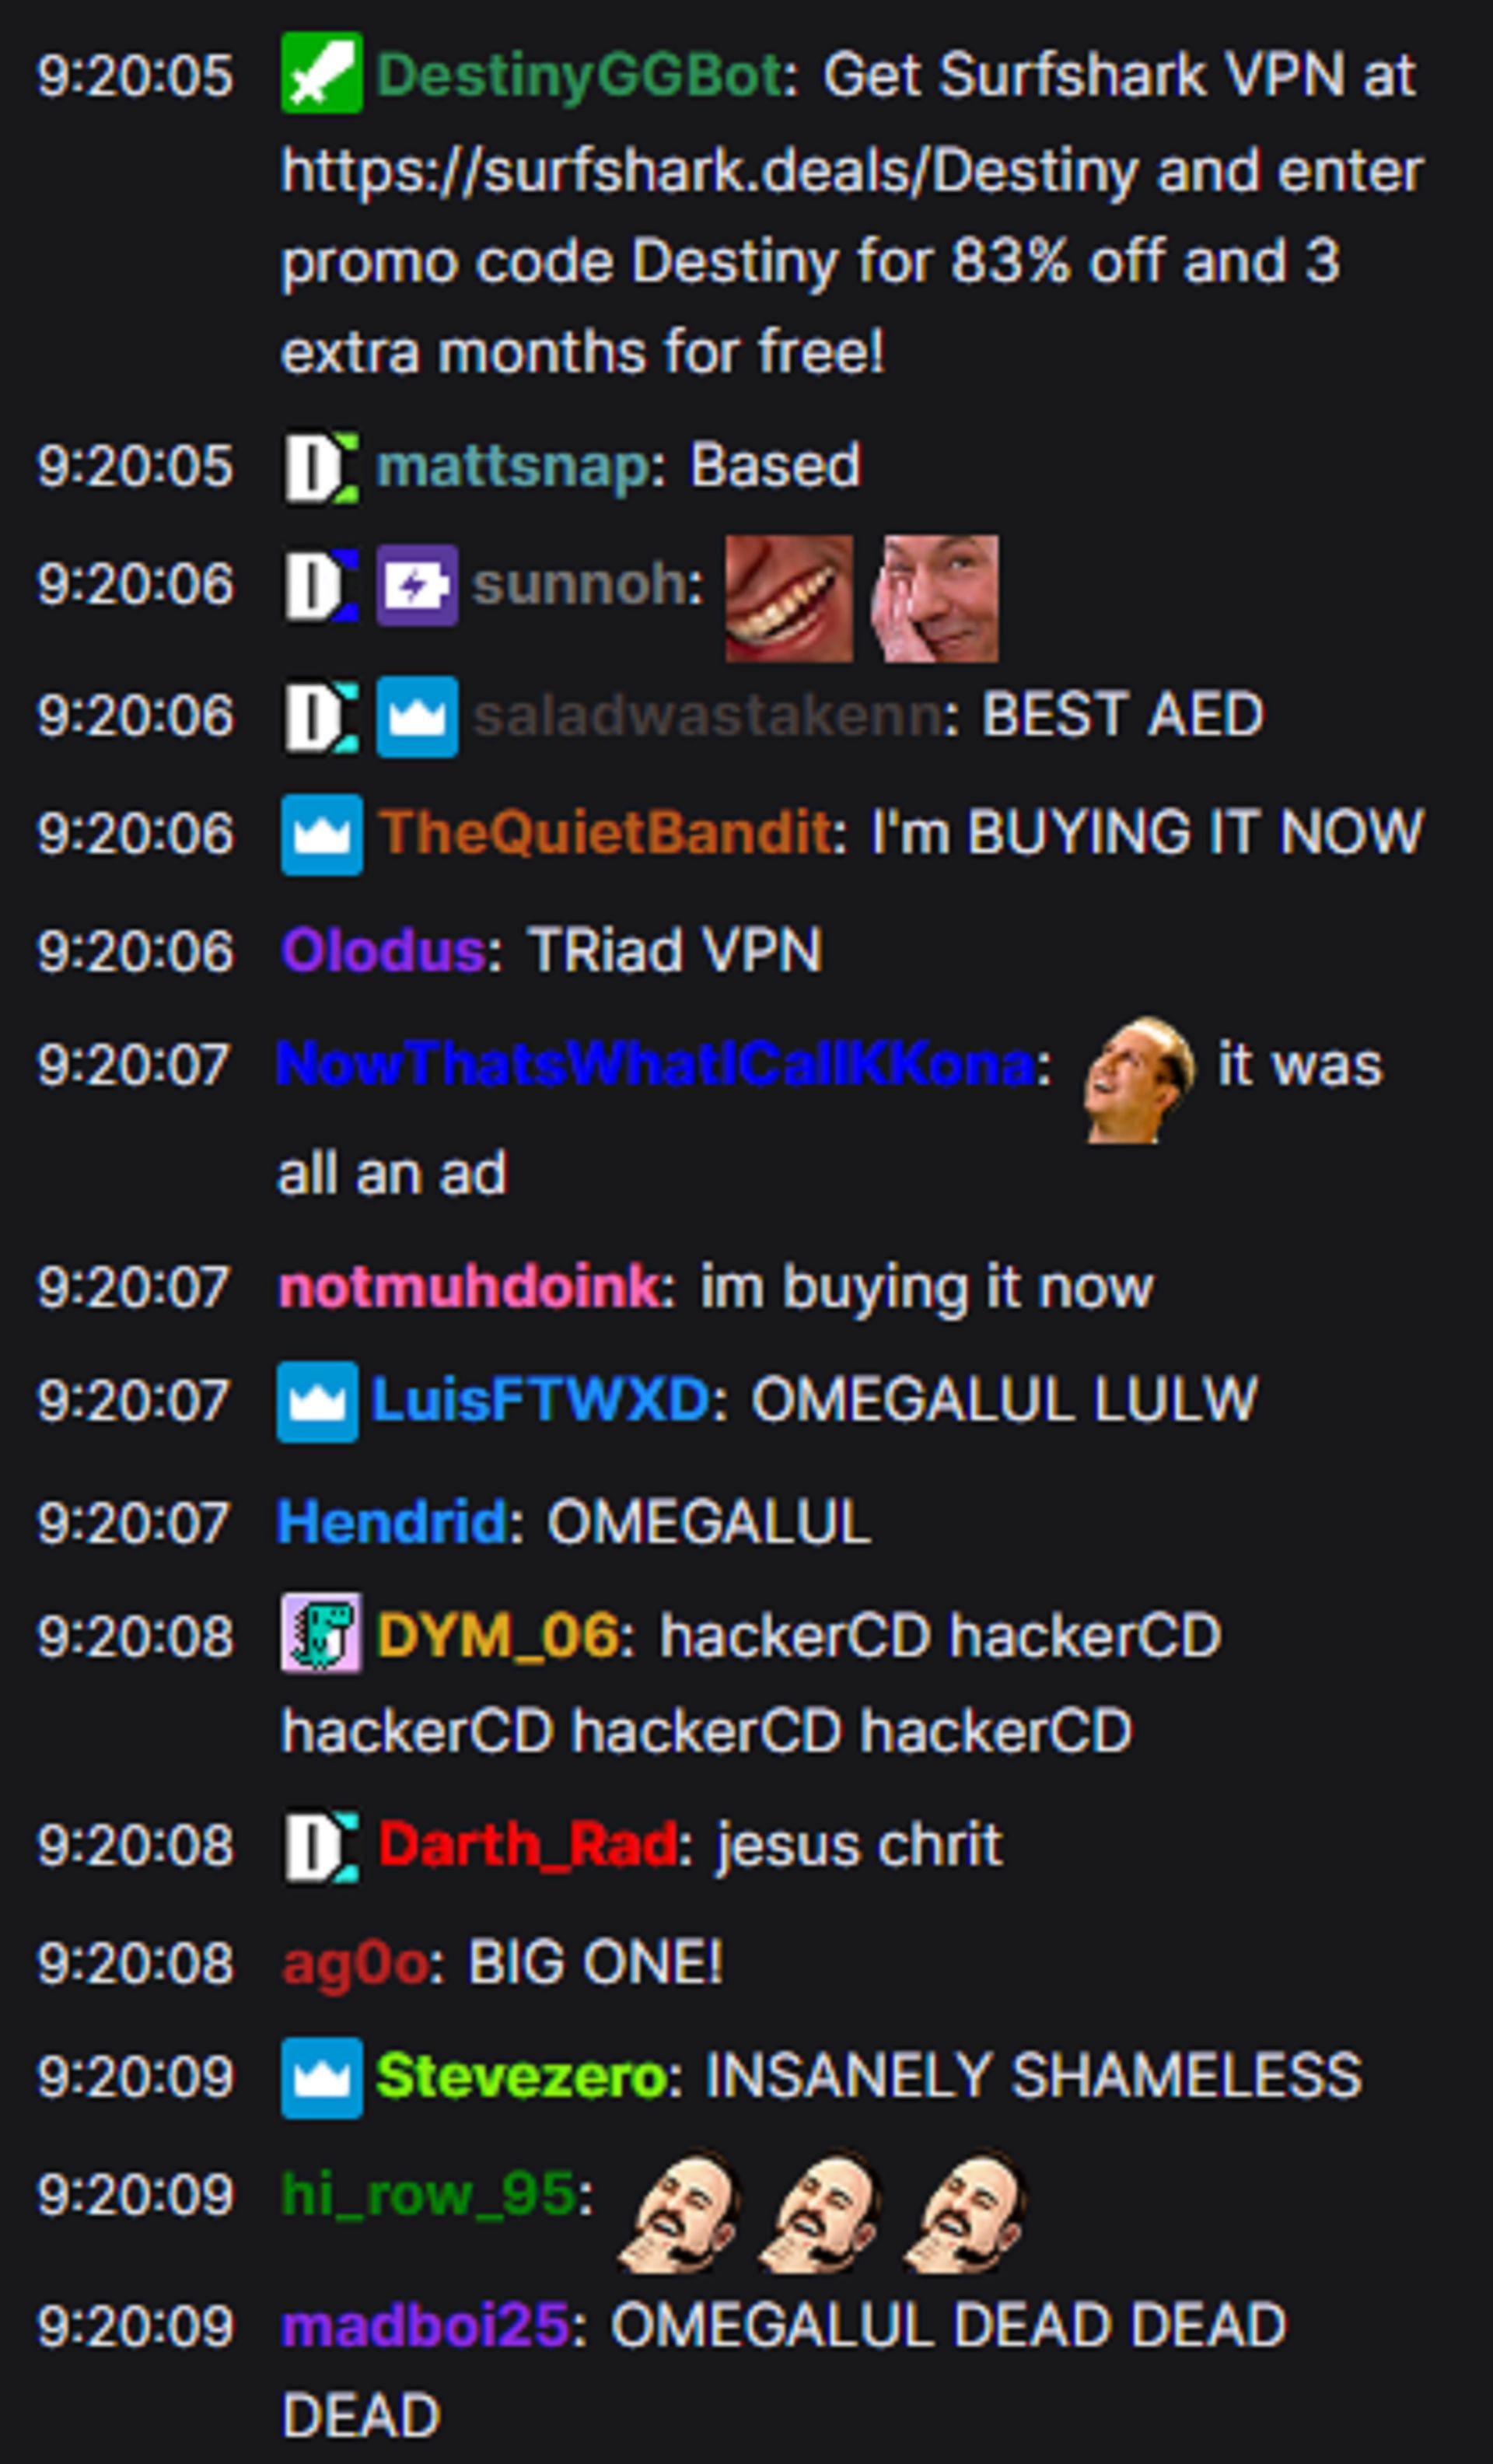 Viewers left in disbelief at this ruthless sponsorship plug (Image via Destiny/Twitch)